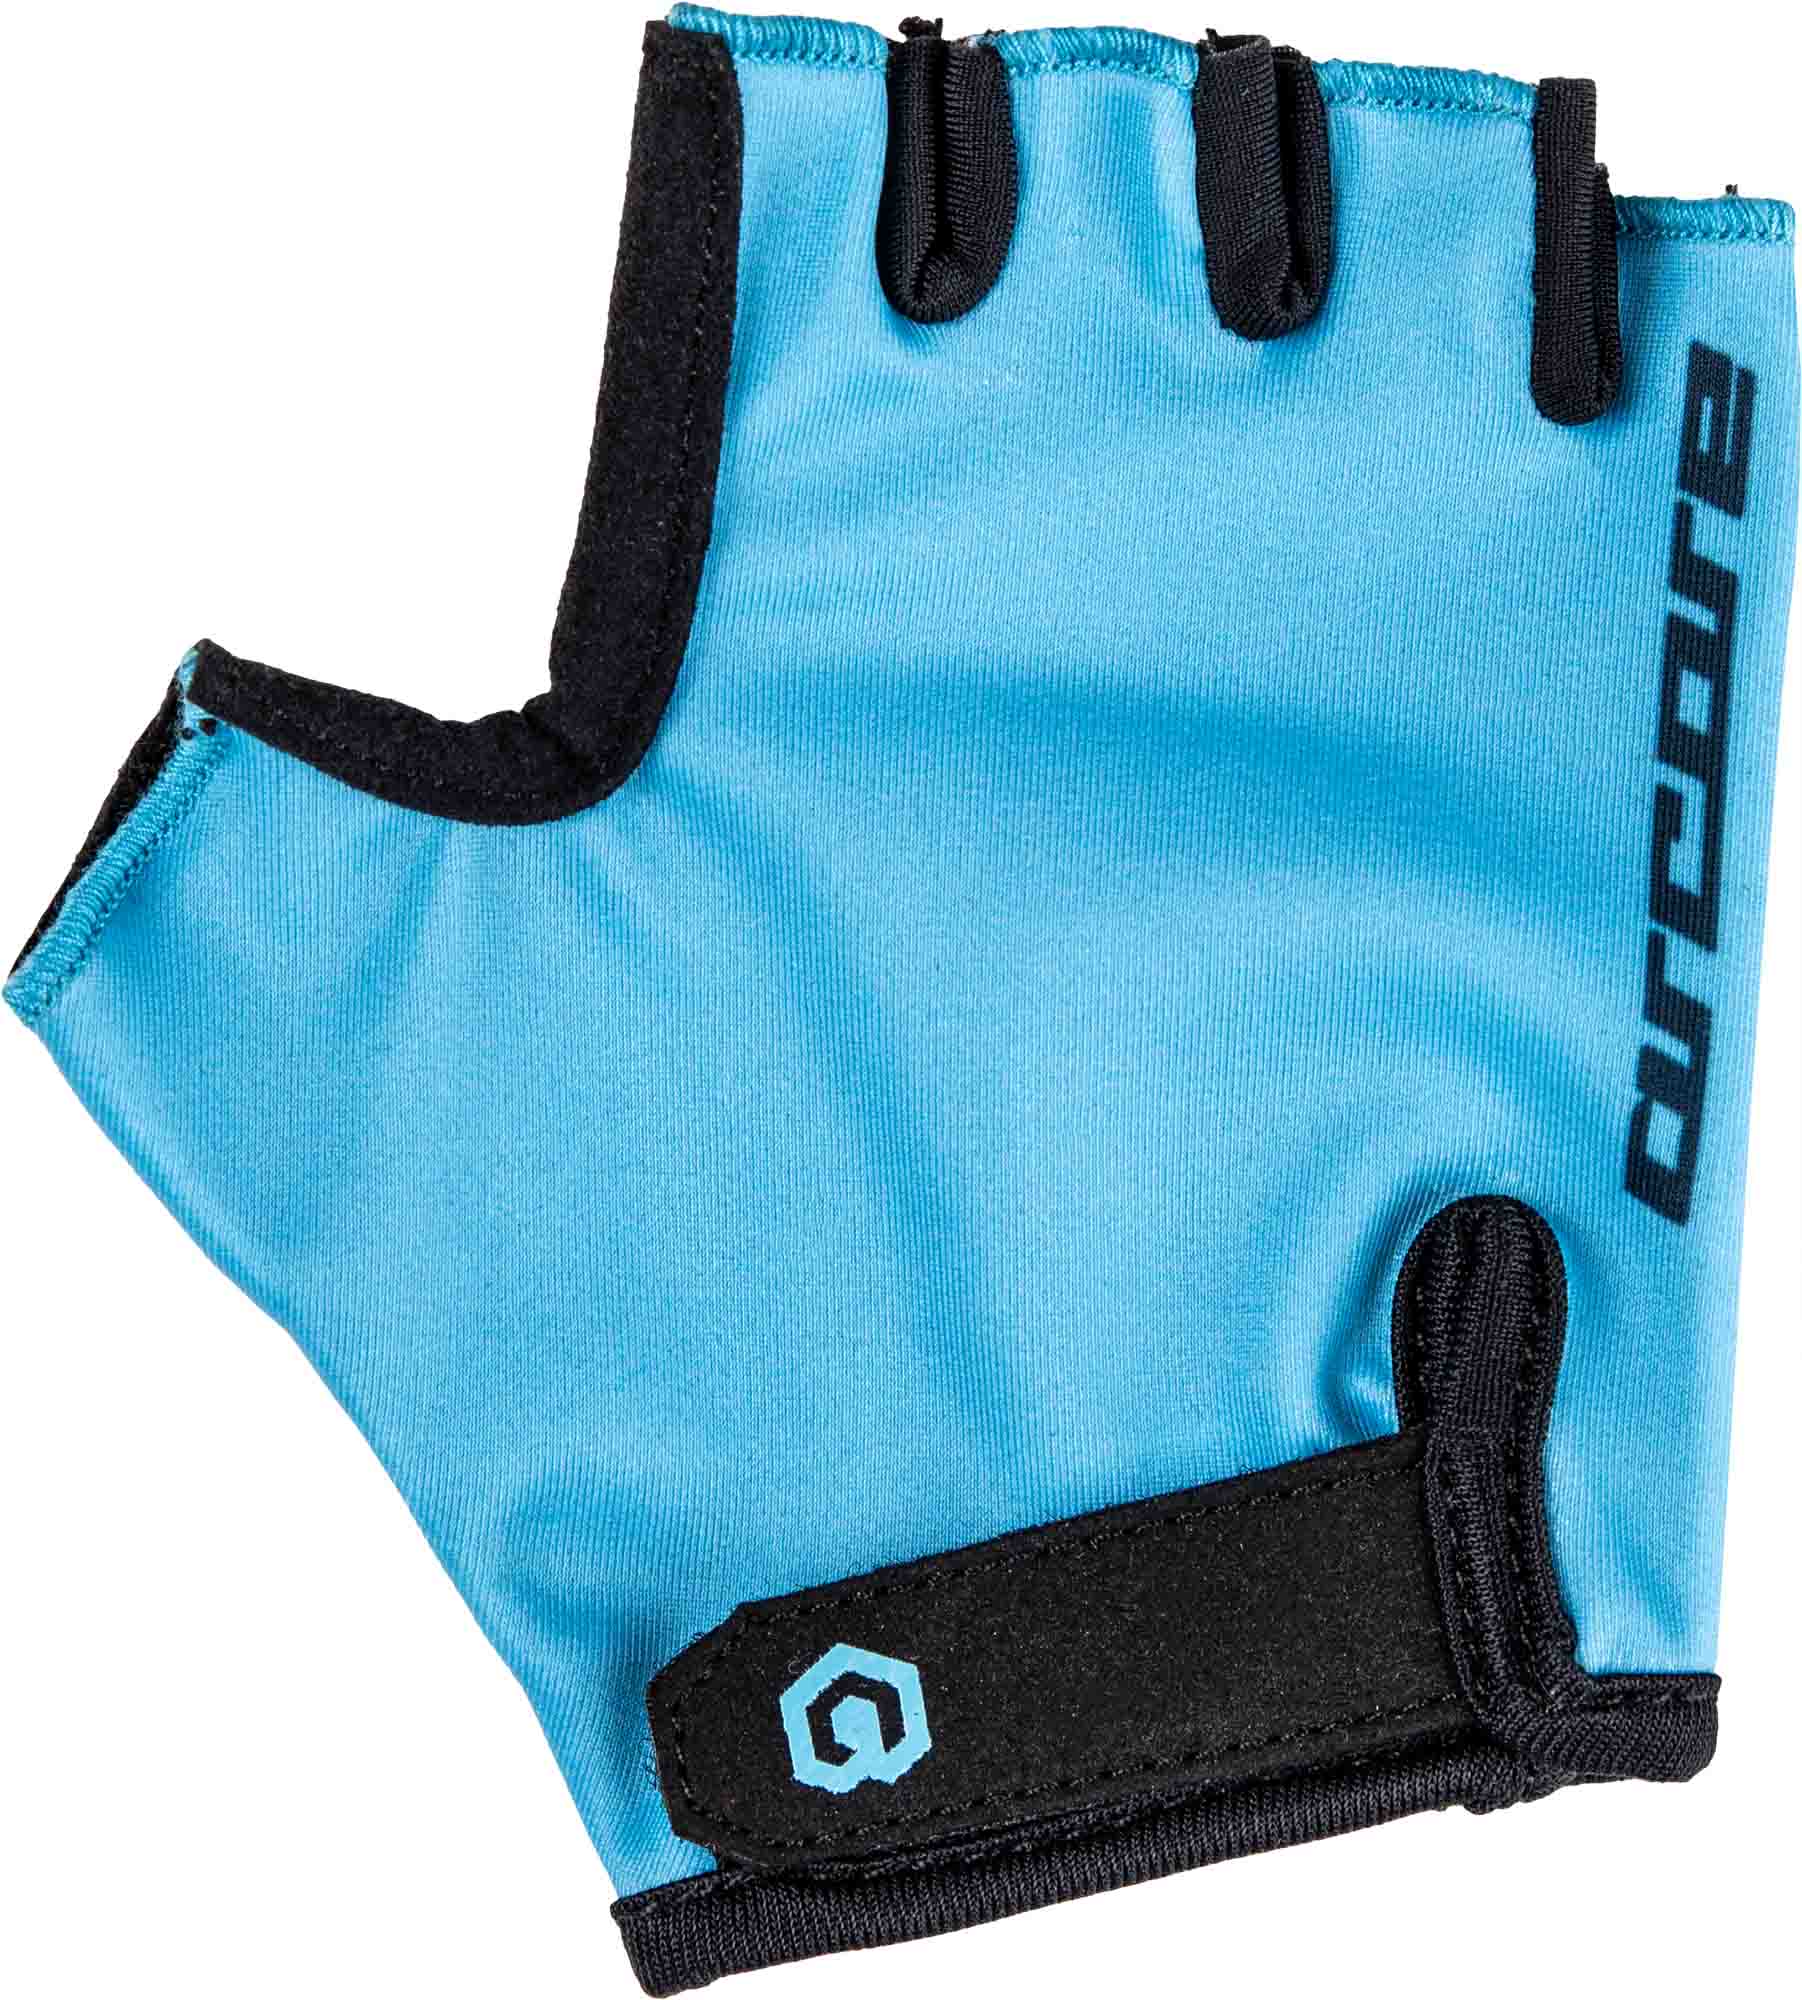 Kids' cycling gloves